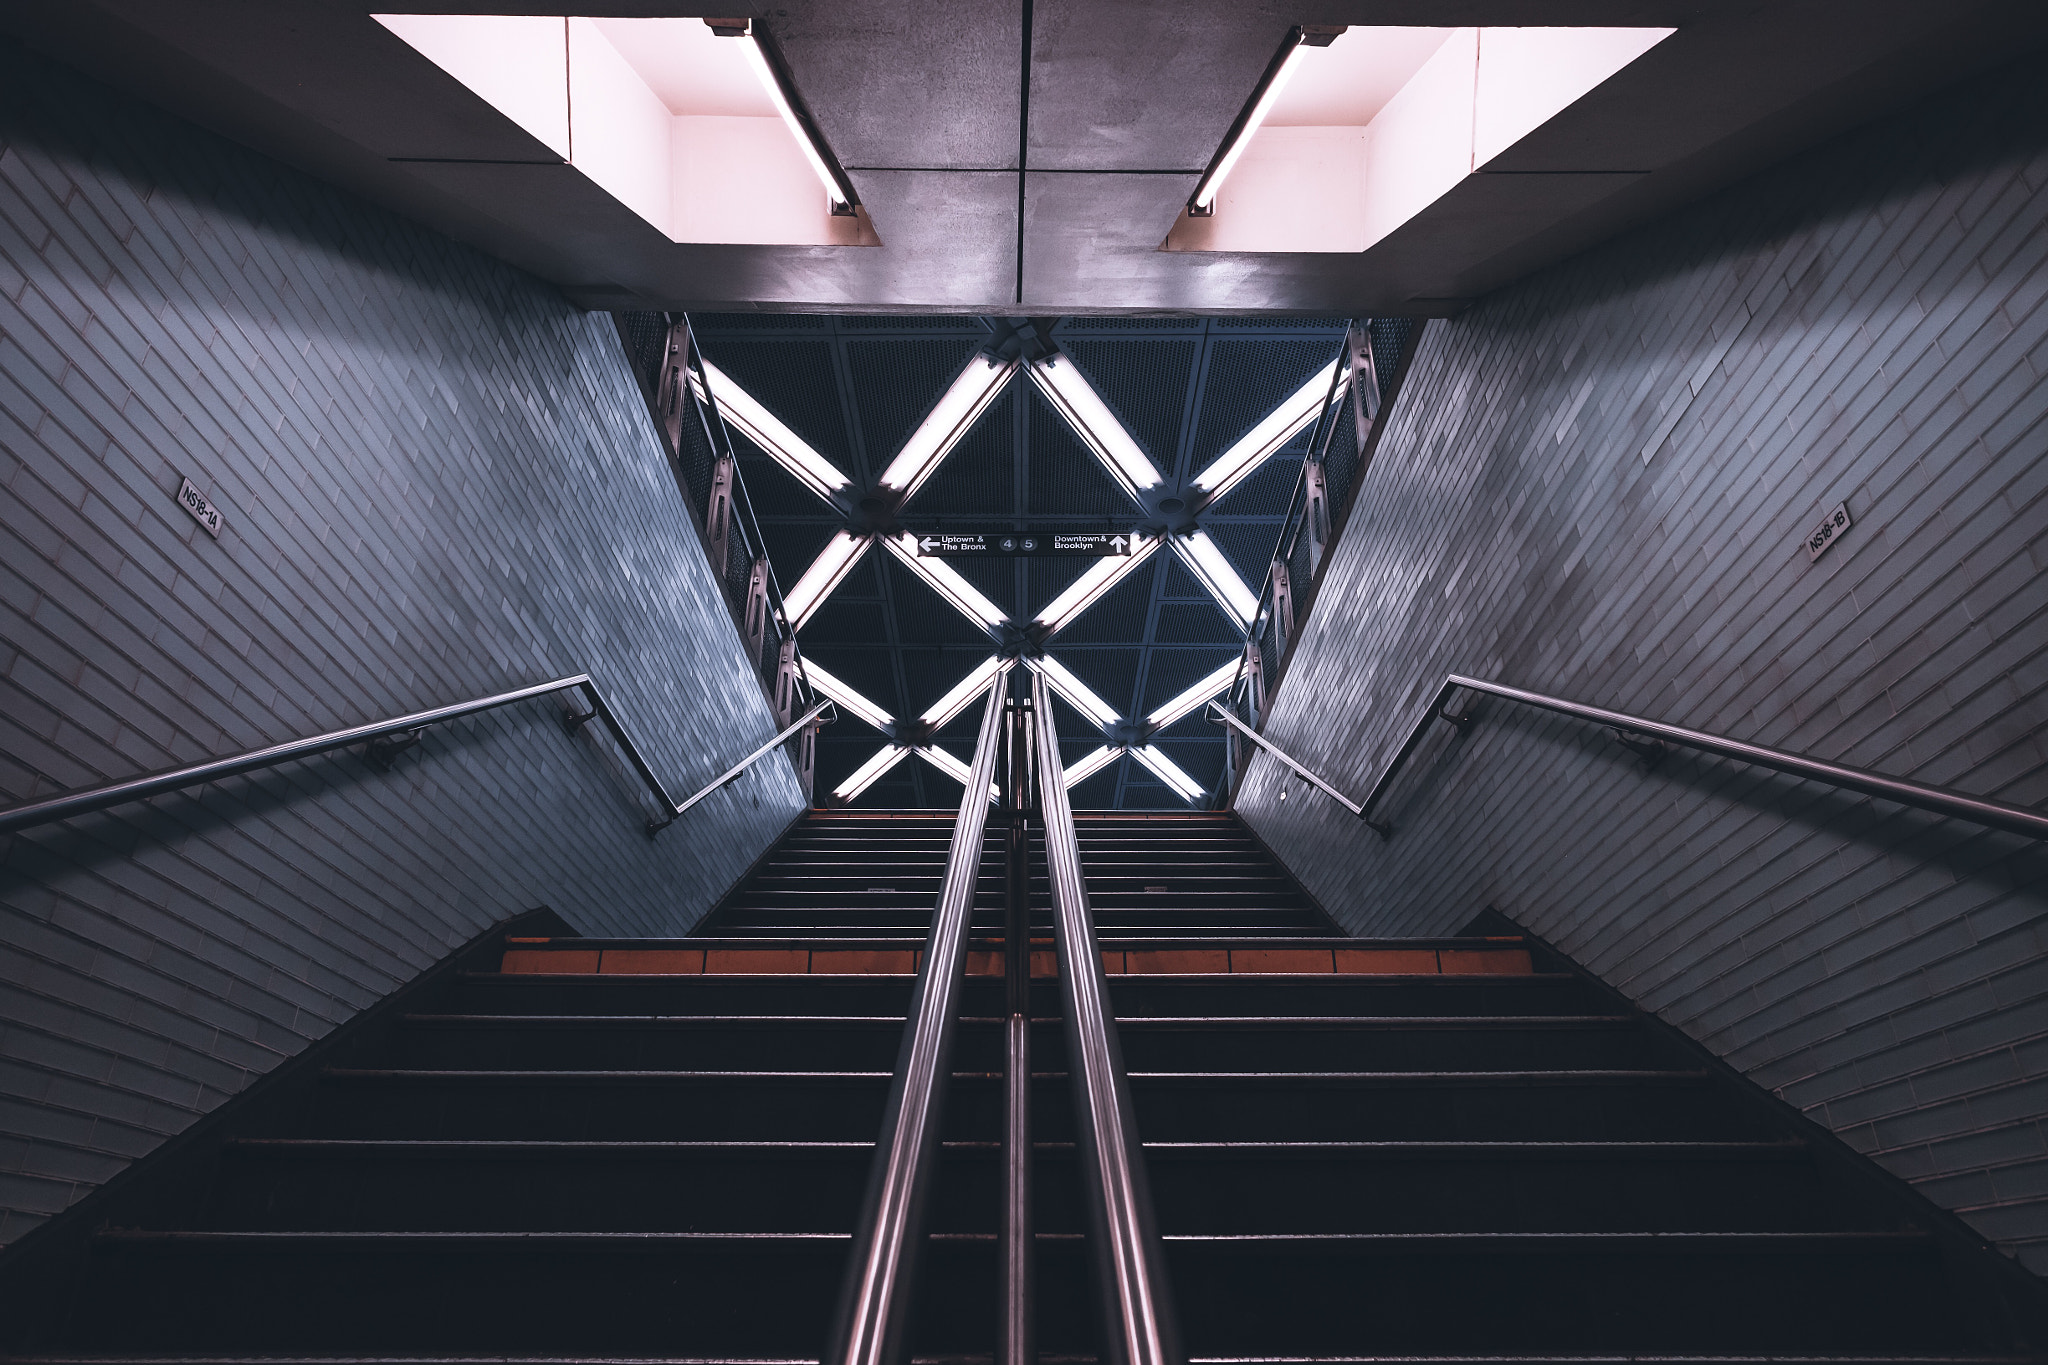 General 2048x1365 architecture subway stairs